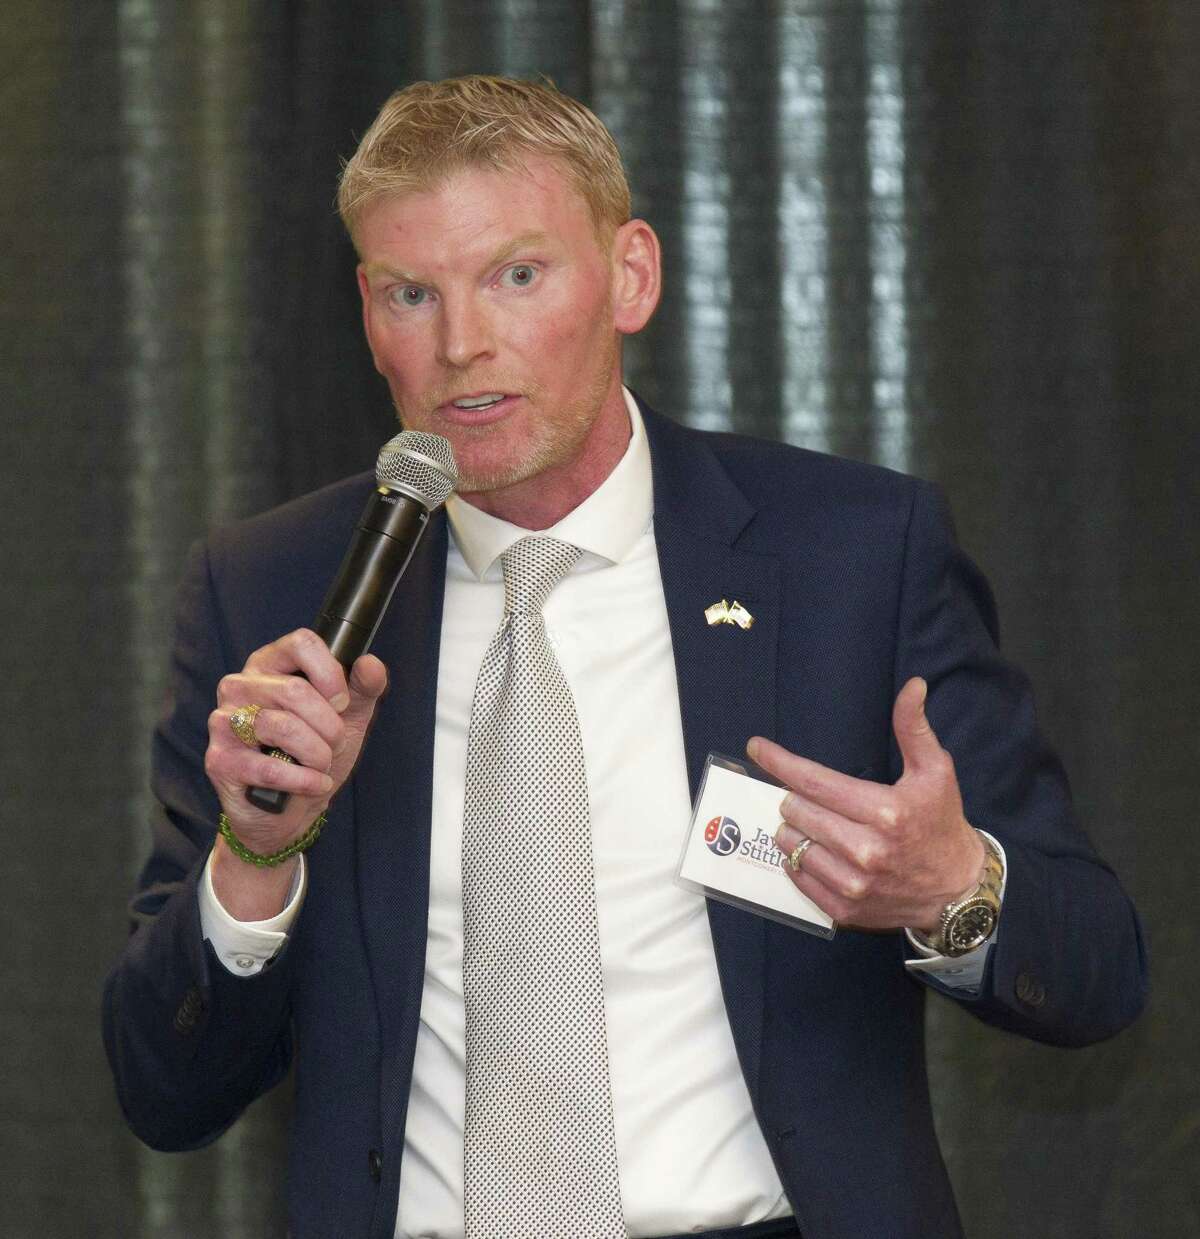 Jay Stittleburg, Democratic candidate for Montgomery County Judge, speaks during the Conroe/Lake Conroe Chamber of Commerce candidate forum at the Lone Star Convention & Expo Center, Tuesday, Feb. 6, 2018, in Conroe.